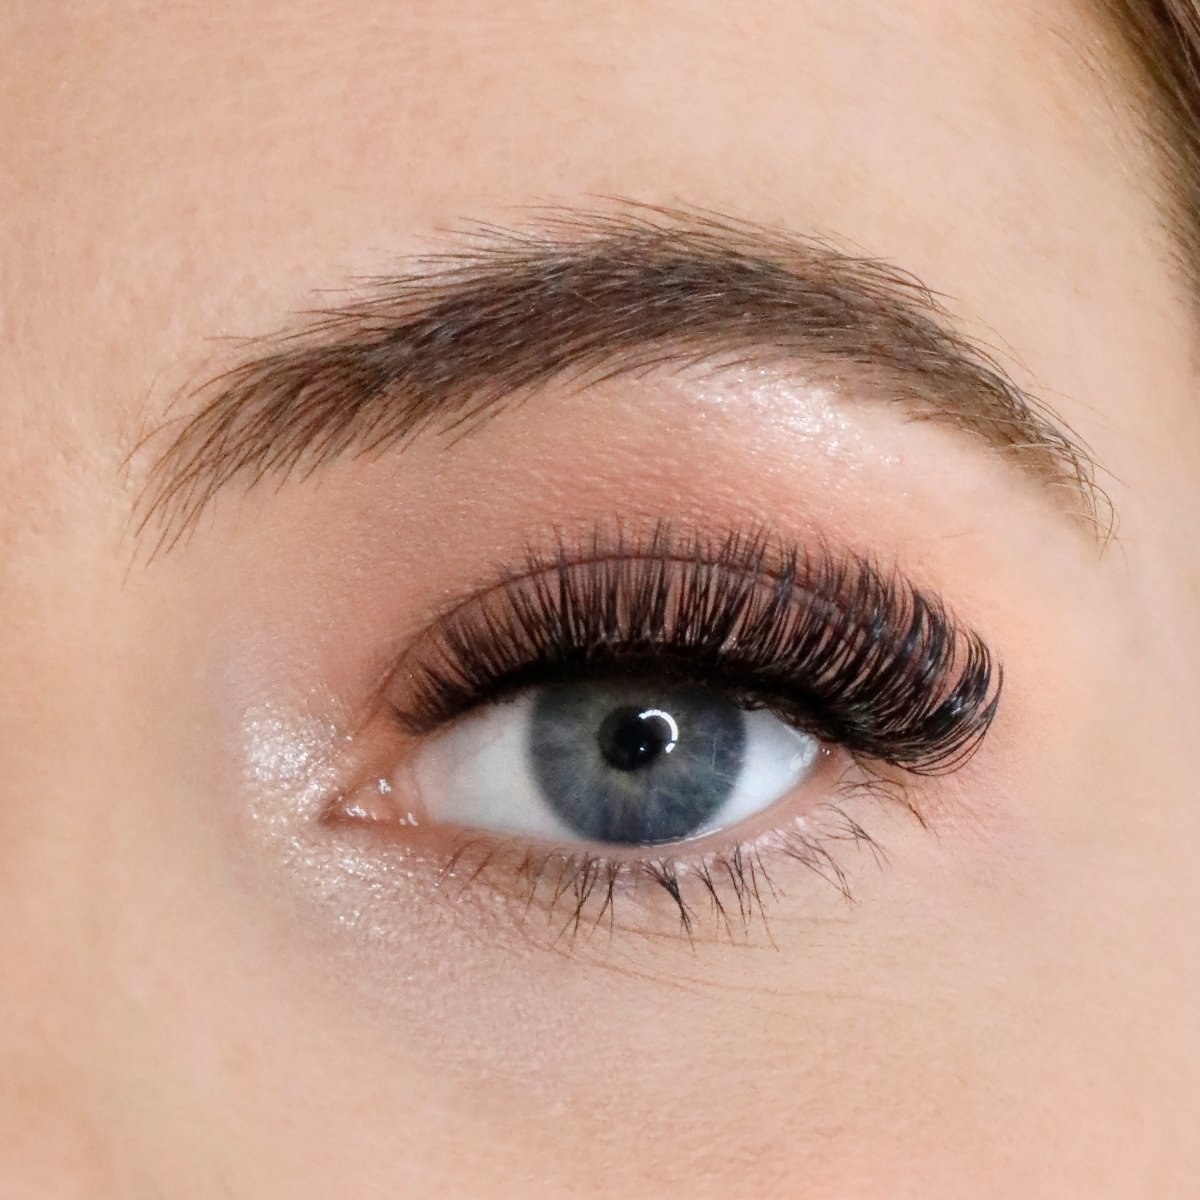 Russian Strip Lashes - Lola's Lashes